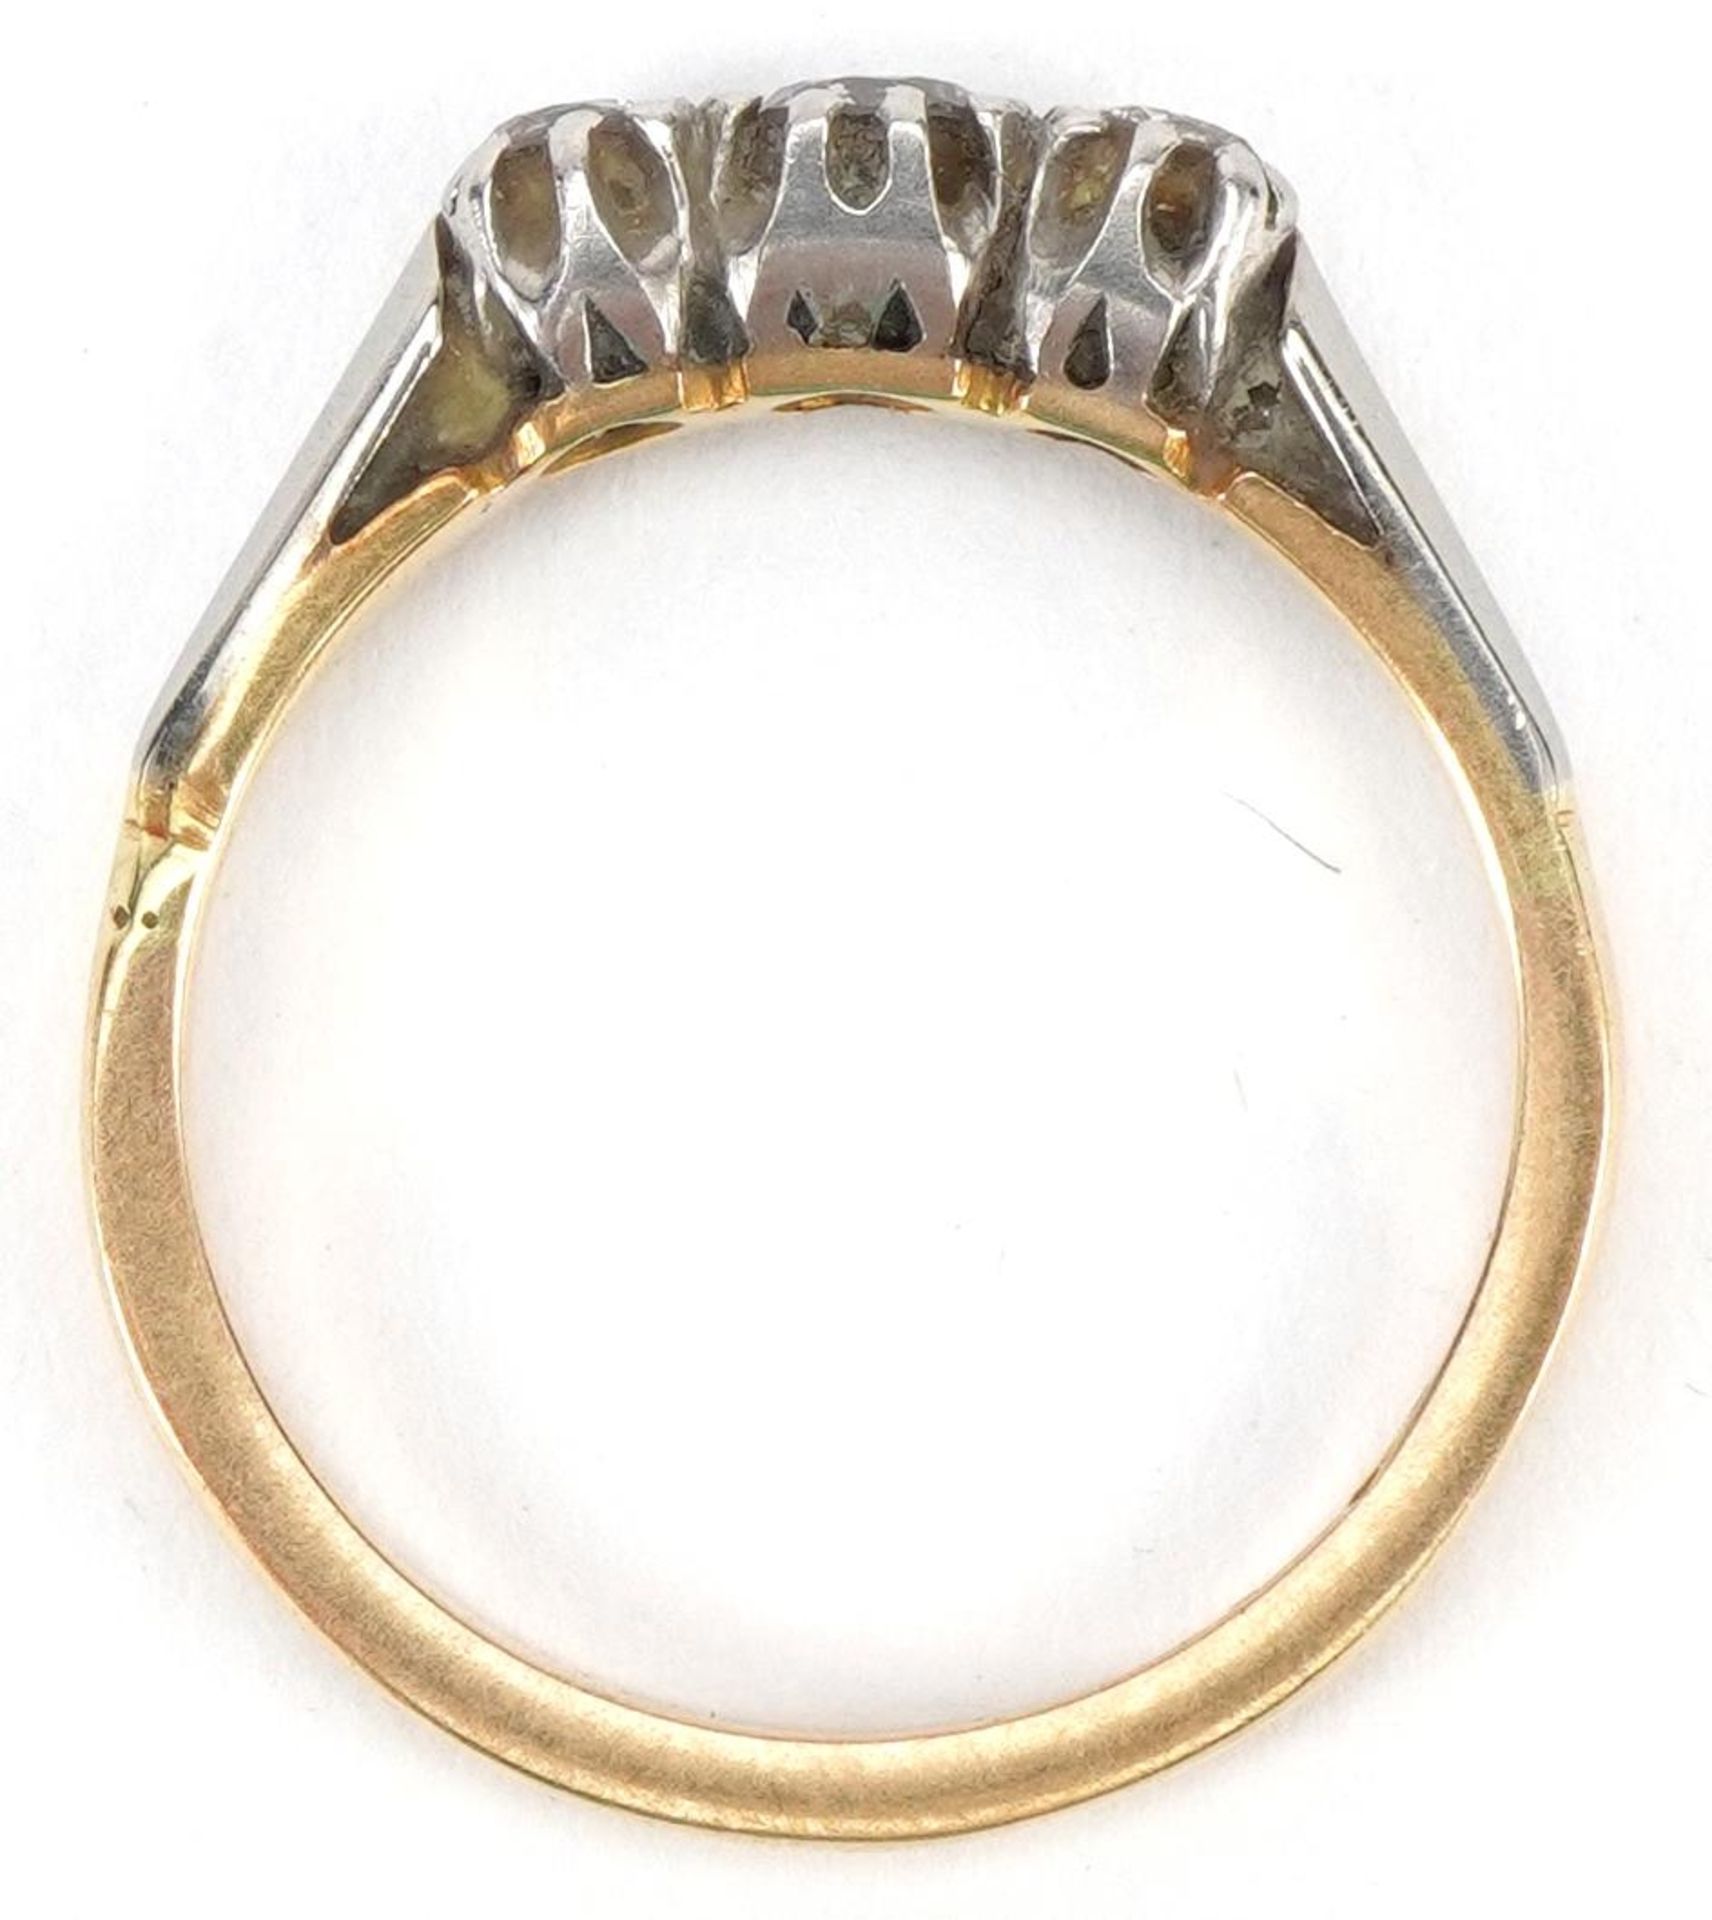 18ct gold diamond three stone ring, the largest diamond approximately 3.0mm in diameter, size M, 2. - Image 3 of 4